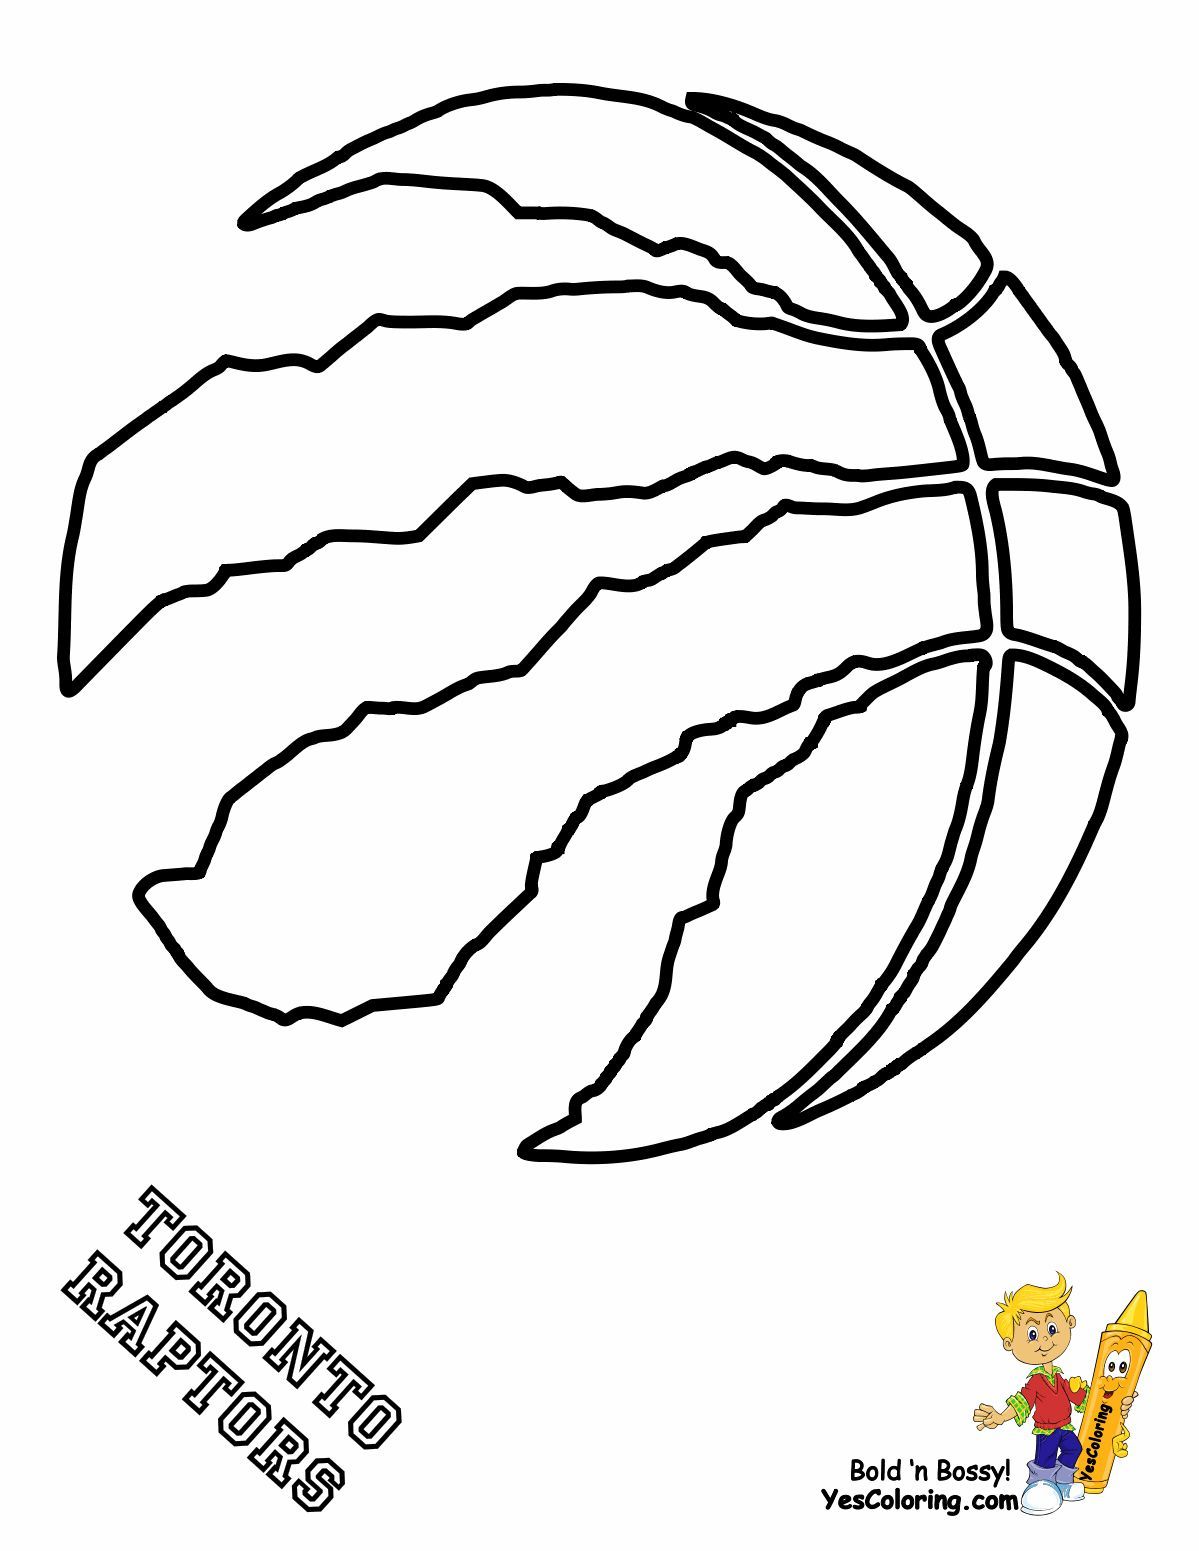 Print Out This Playoffs Basketball Coloring Sheets! Wild Raptors! 